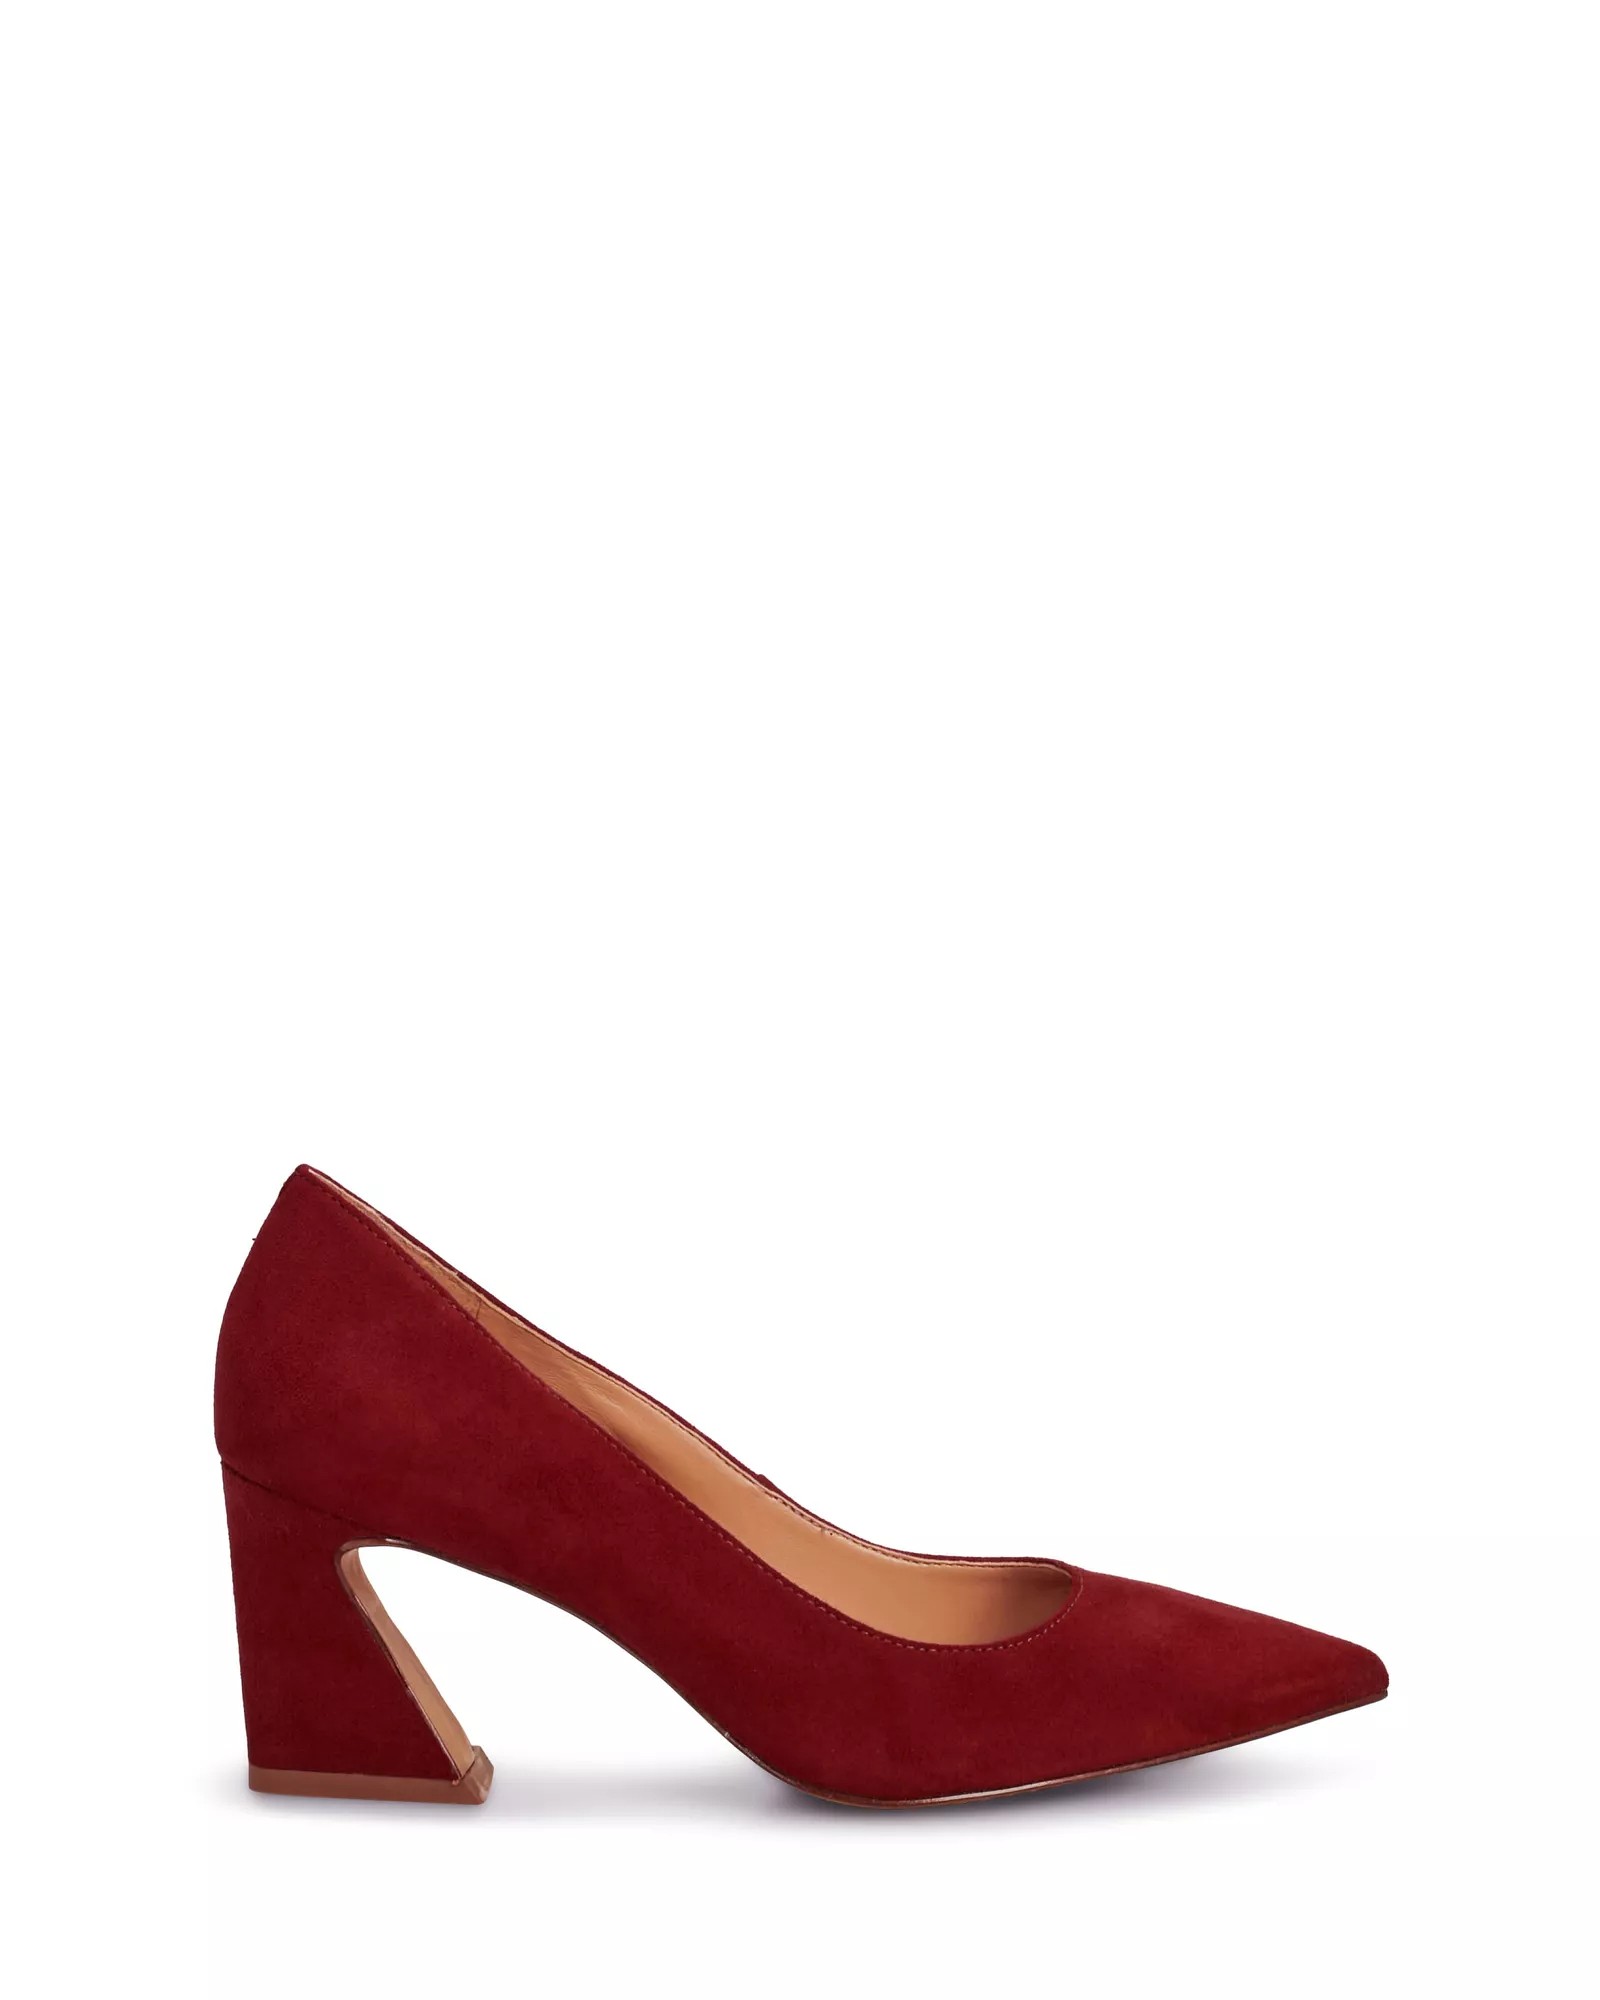 Women's Vince Camuto Hailenda Pumps Size 12 Red Currant Suede